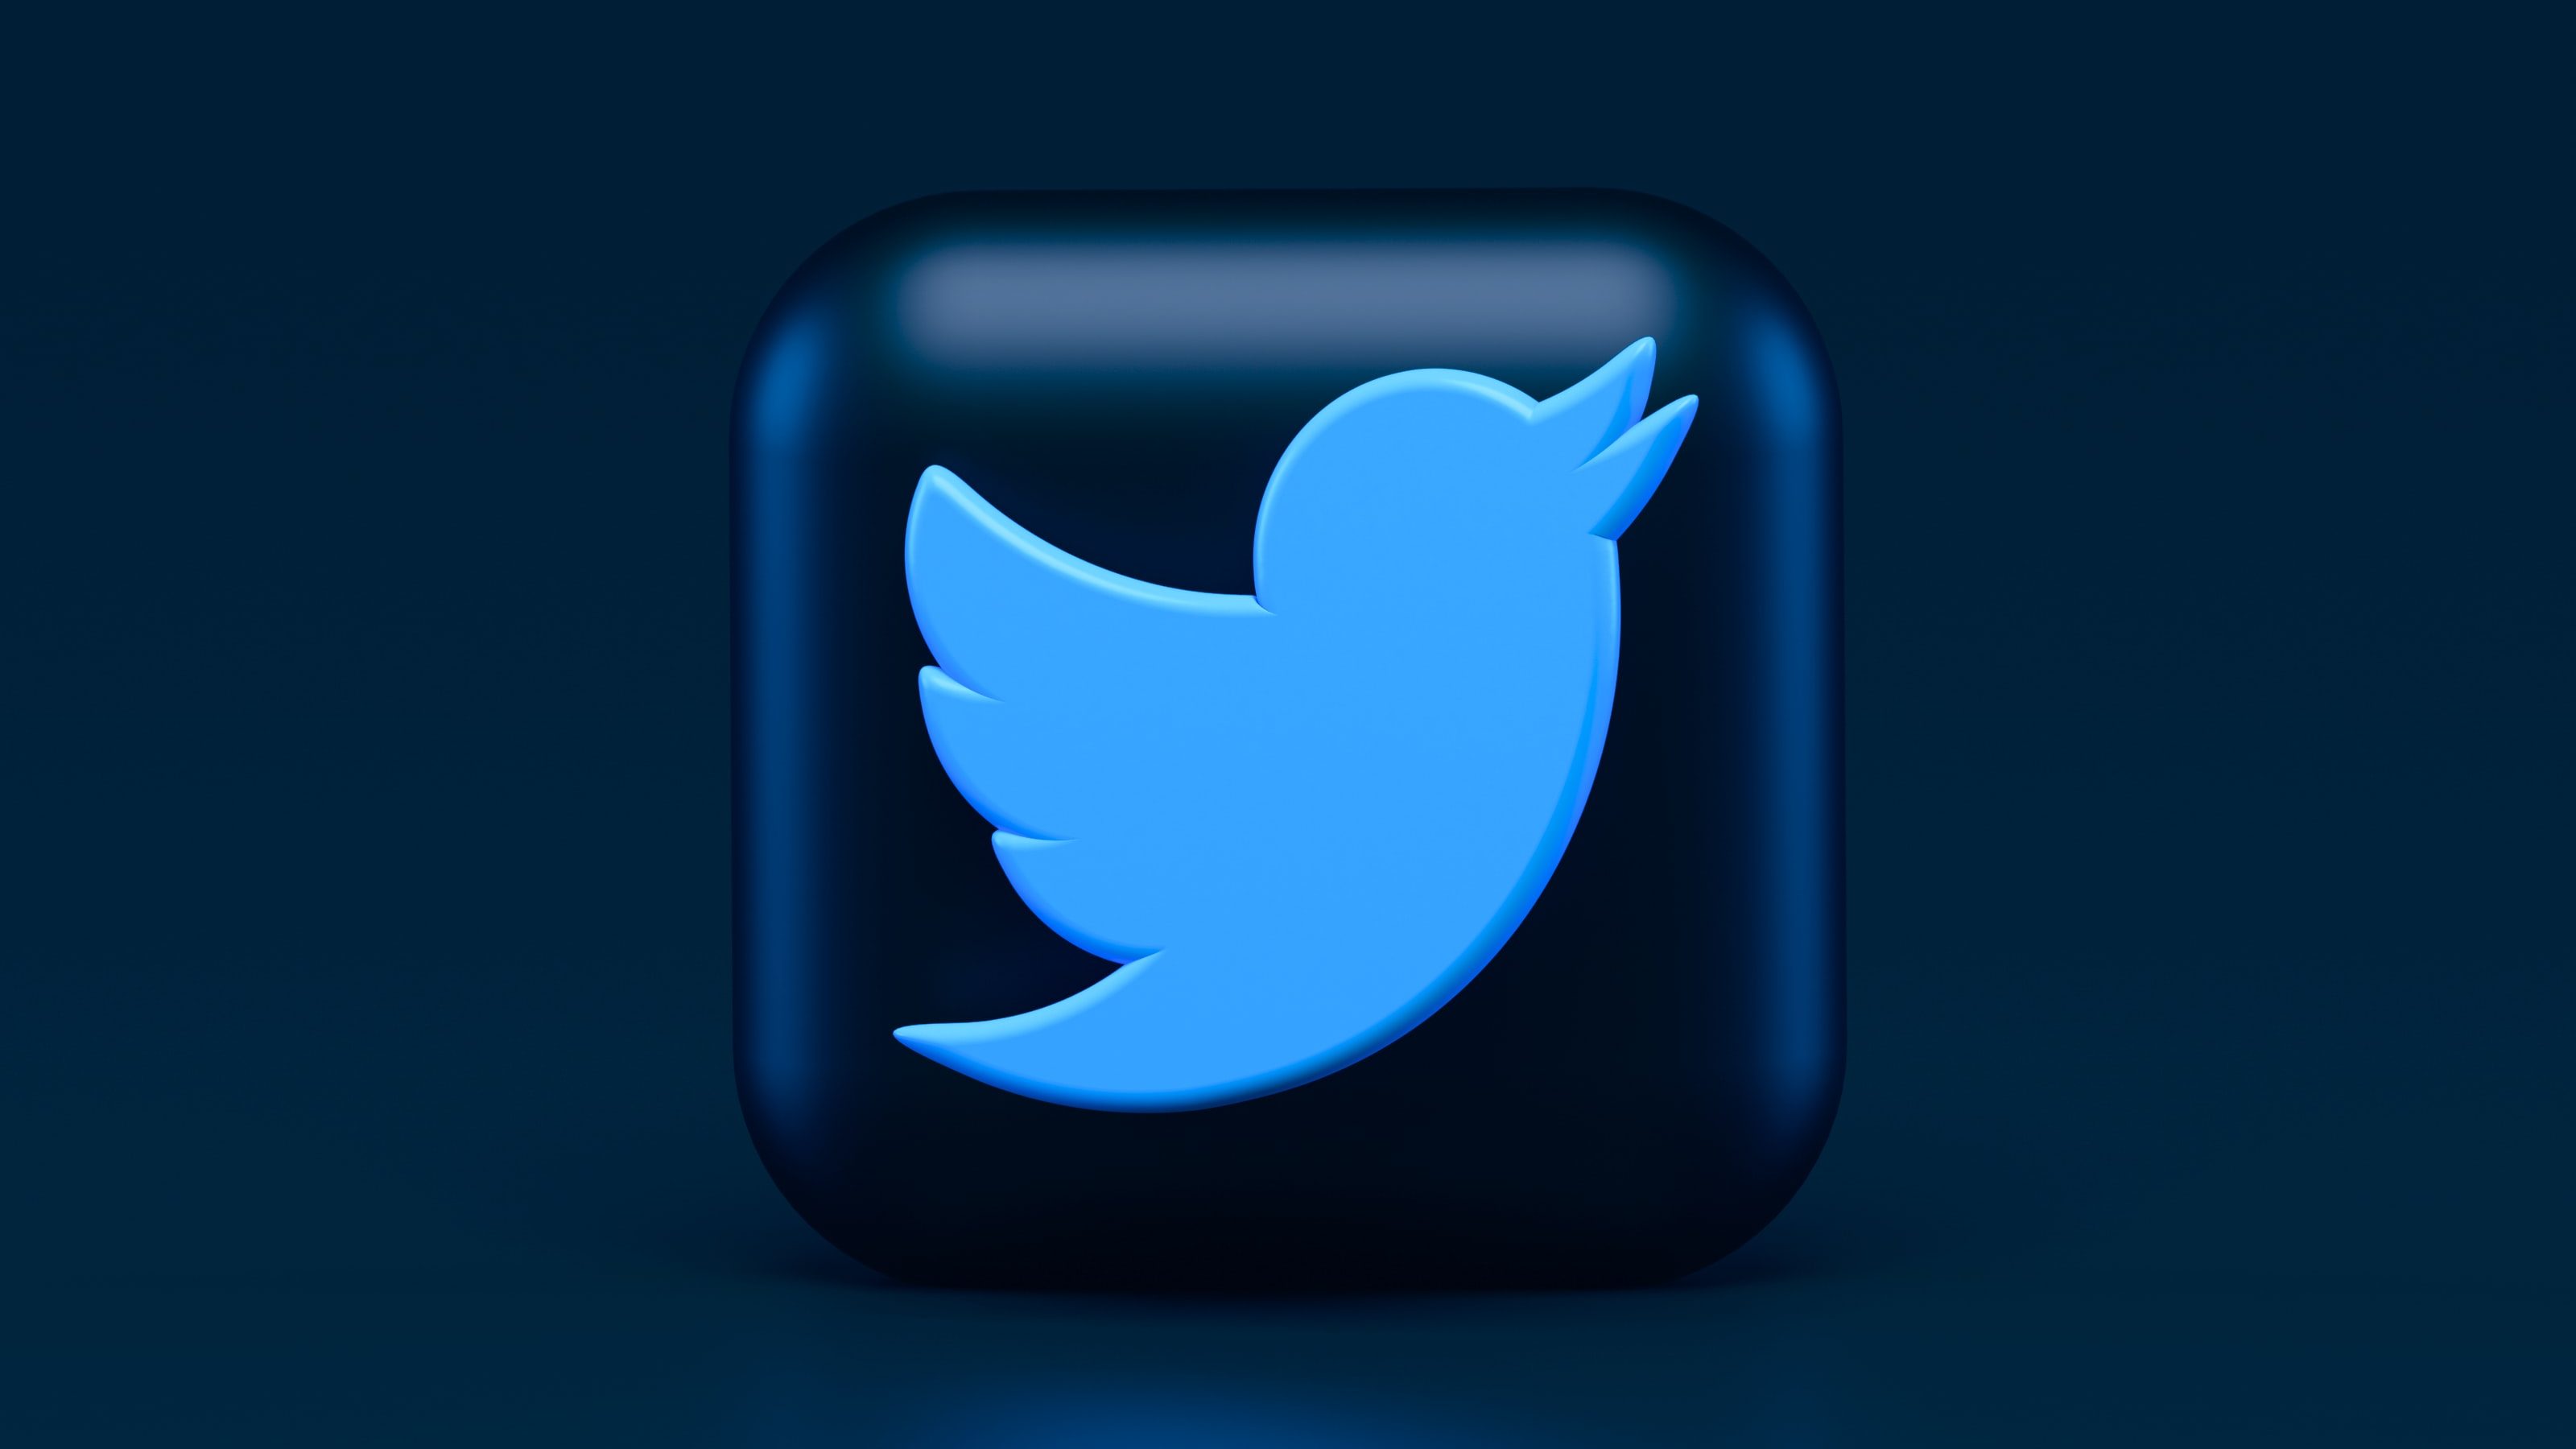 Twitter is increasing the price of Twitter Blue from $2.99 to $4.99 per month | TechCrunch